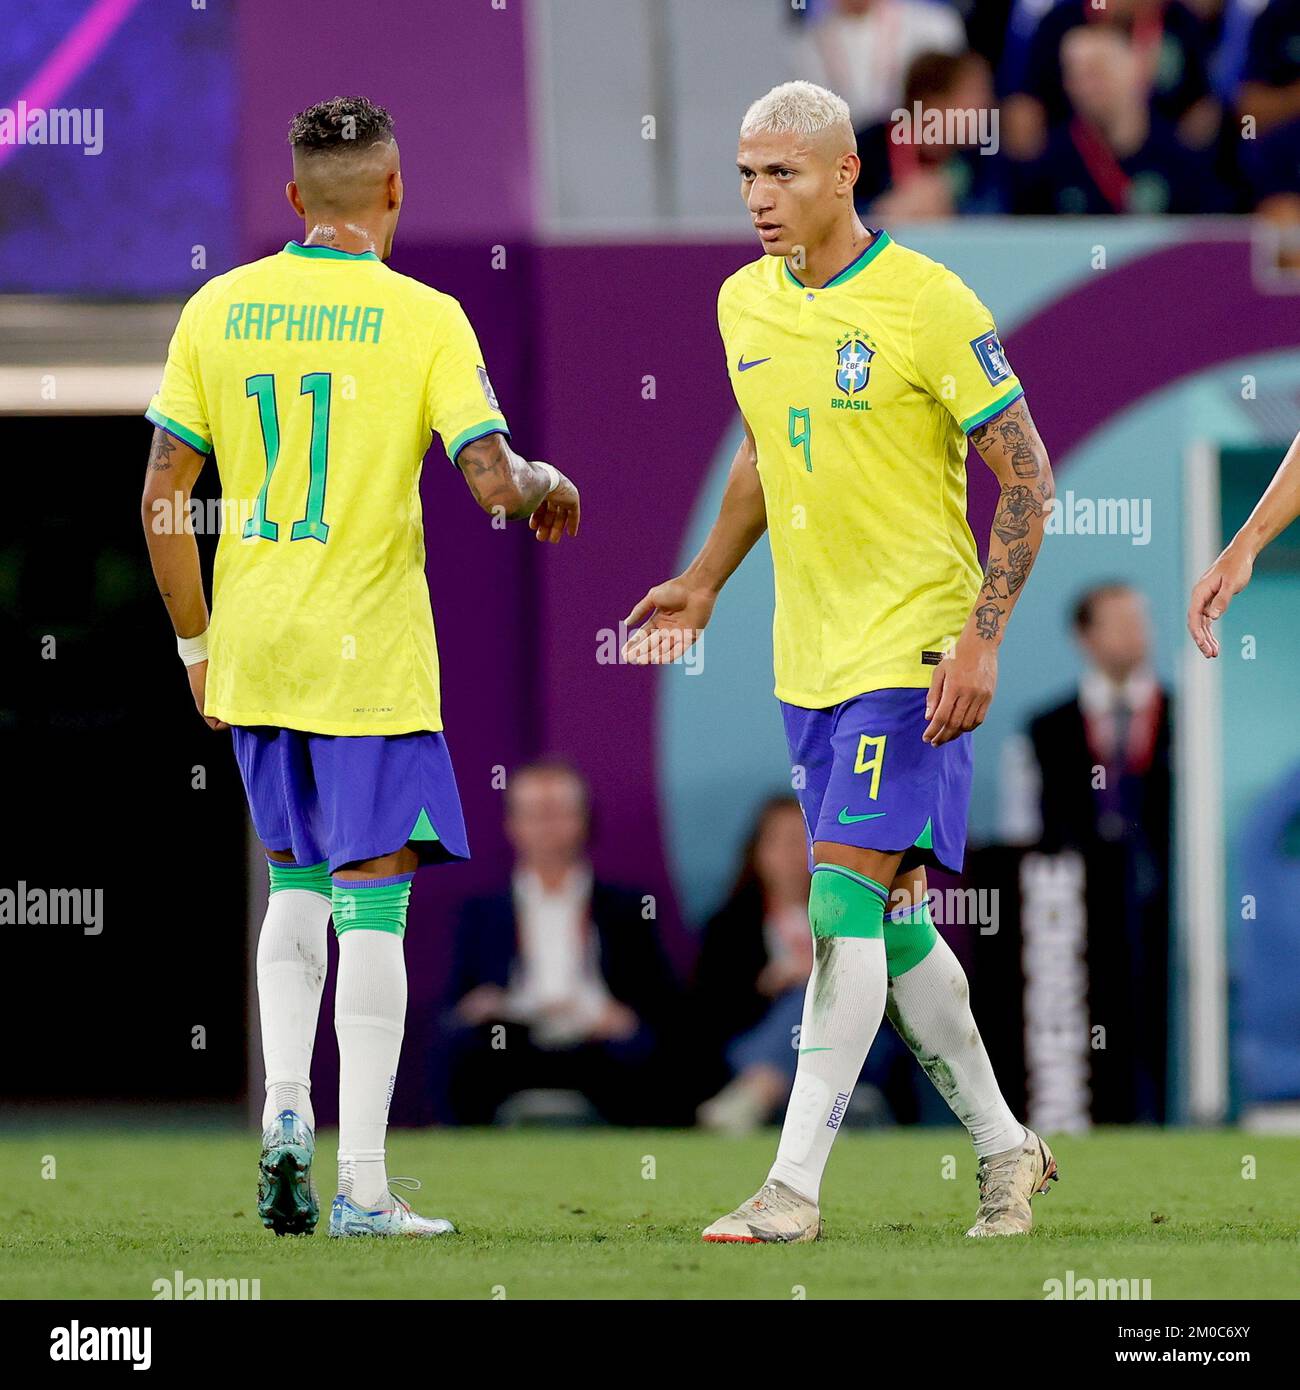 https://c8.alamy.com/comp/2M0C6XY/doha-05-12-2022-stadium-world-cup-2022-in-qatar-round-of-16-game-between-brazil-and-south-korea-brazil-player-richarlison-with-raphinha-after-scoring-3-0-photo-by-pro-shotssipa-usa-2M0C6XY.jpg